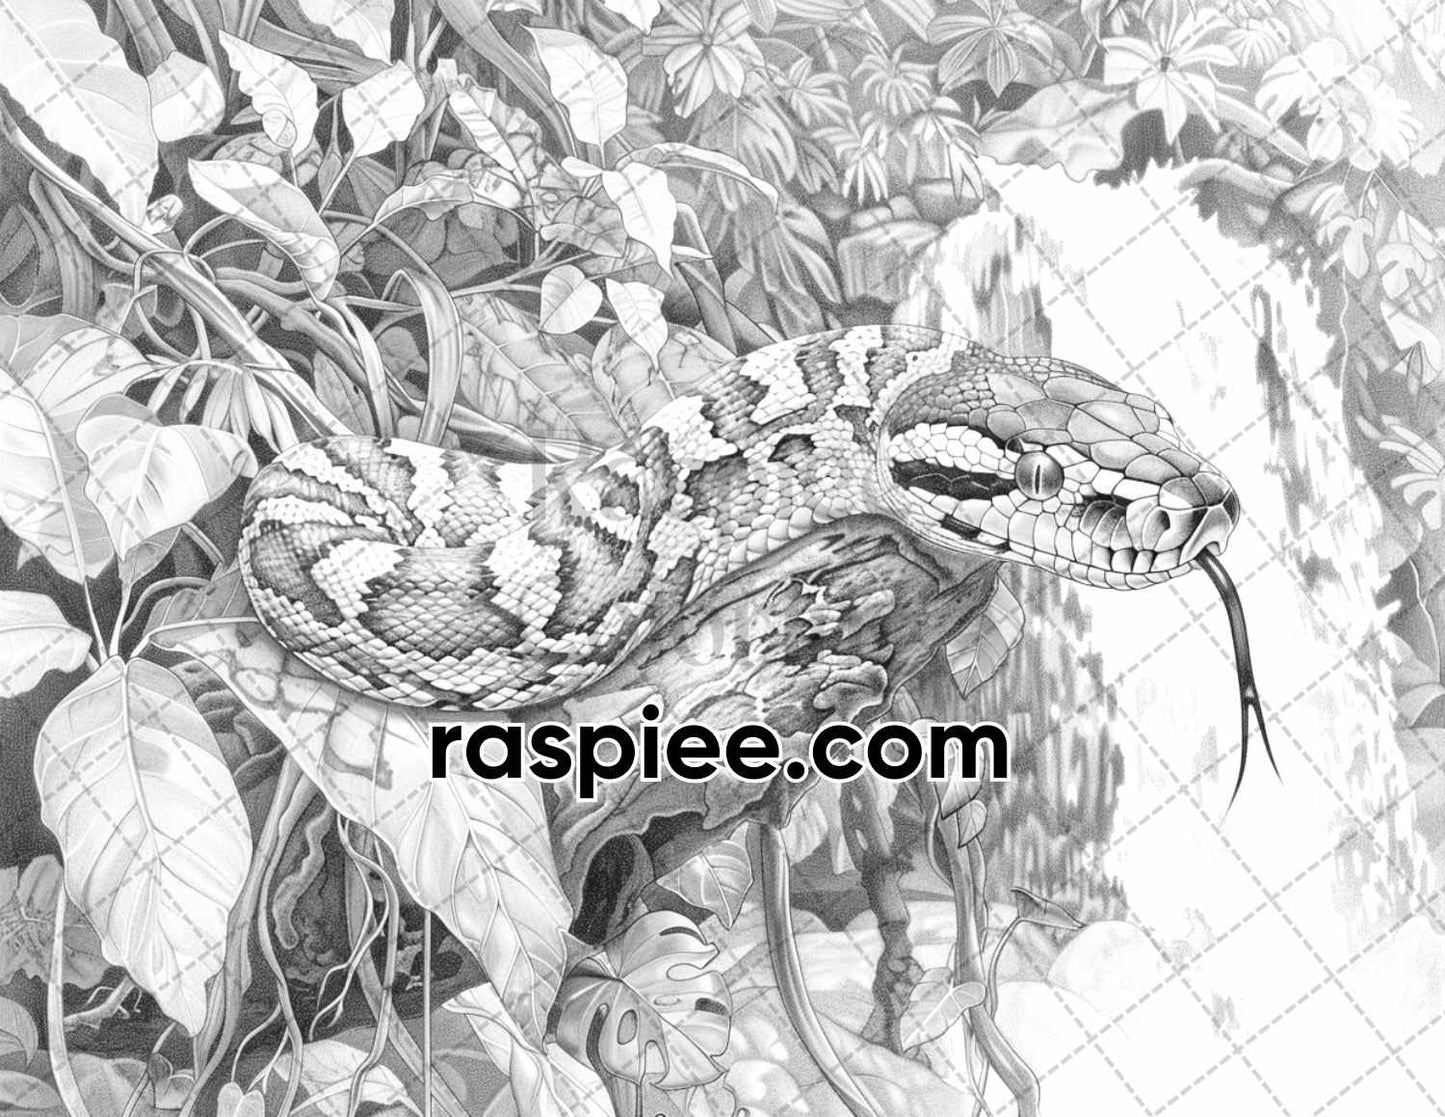 adult coloring pages, adult coloring sheets, adult coloring book pdf, adult coloring book printable, grayscale coloring pages, grayscale coloring books, landscapes coloring pages for adults, landscapes coloring book, grayscale illustration, summer coloring pages, animal coloring pages